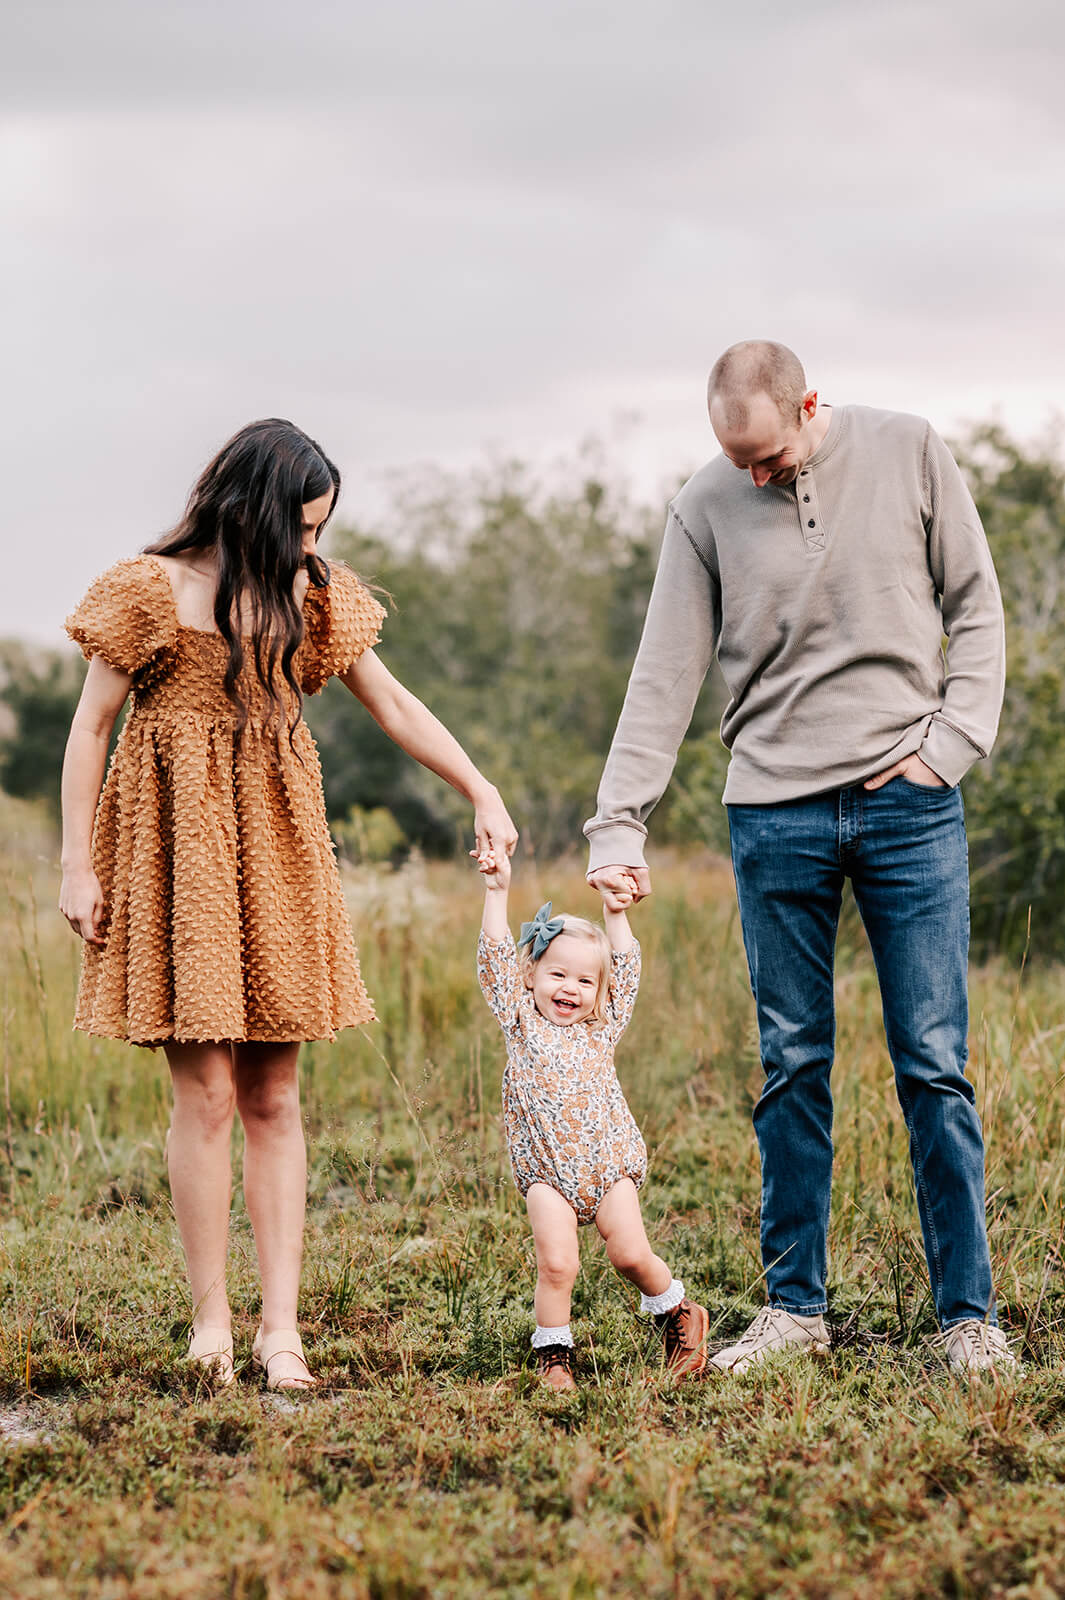 A mom and dad hold hands with their toddler daughter while walking through a grassy field after visiting toads and tulips furniture